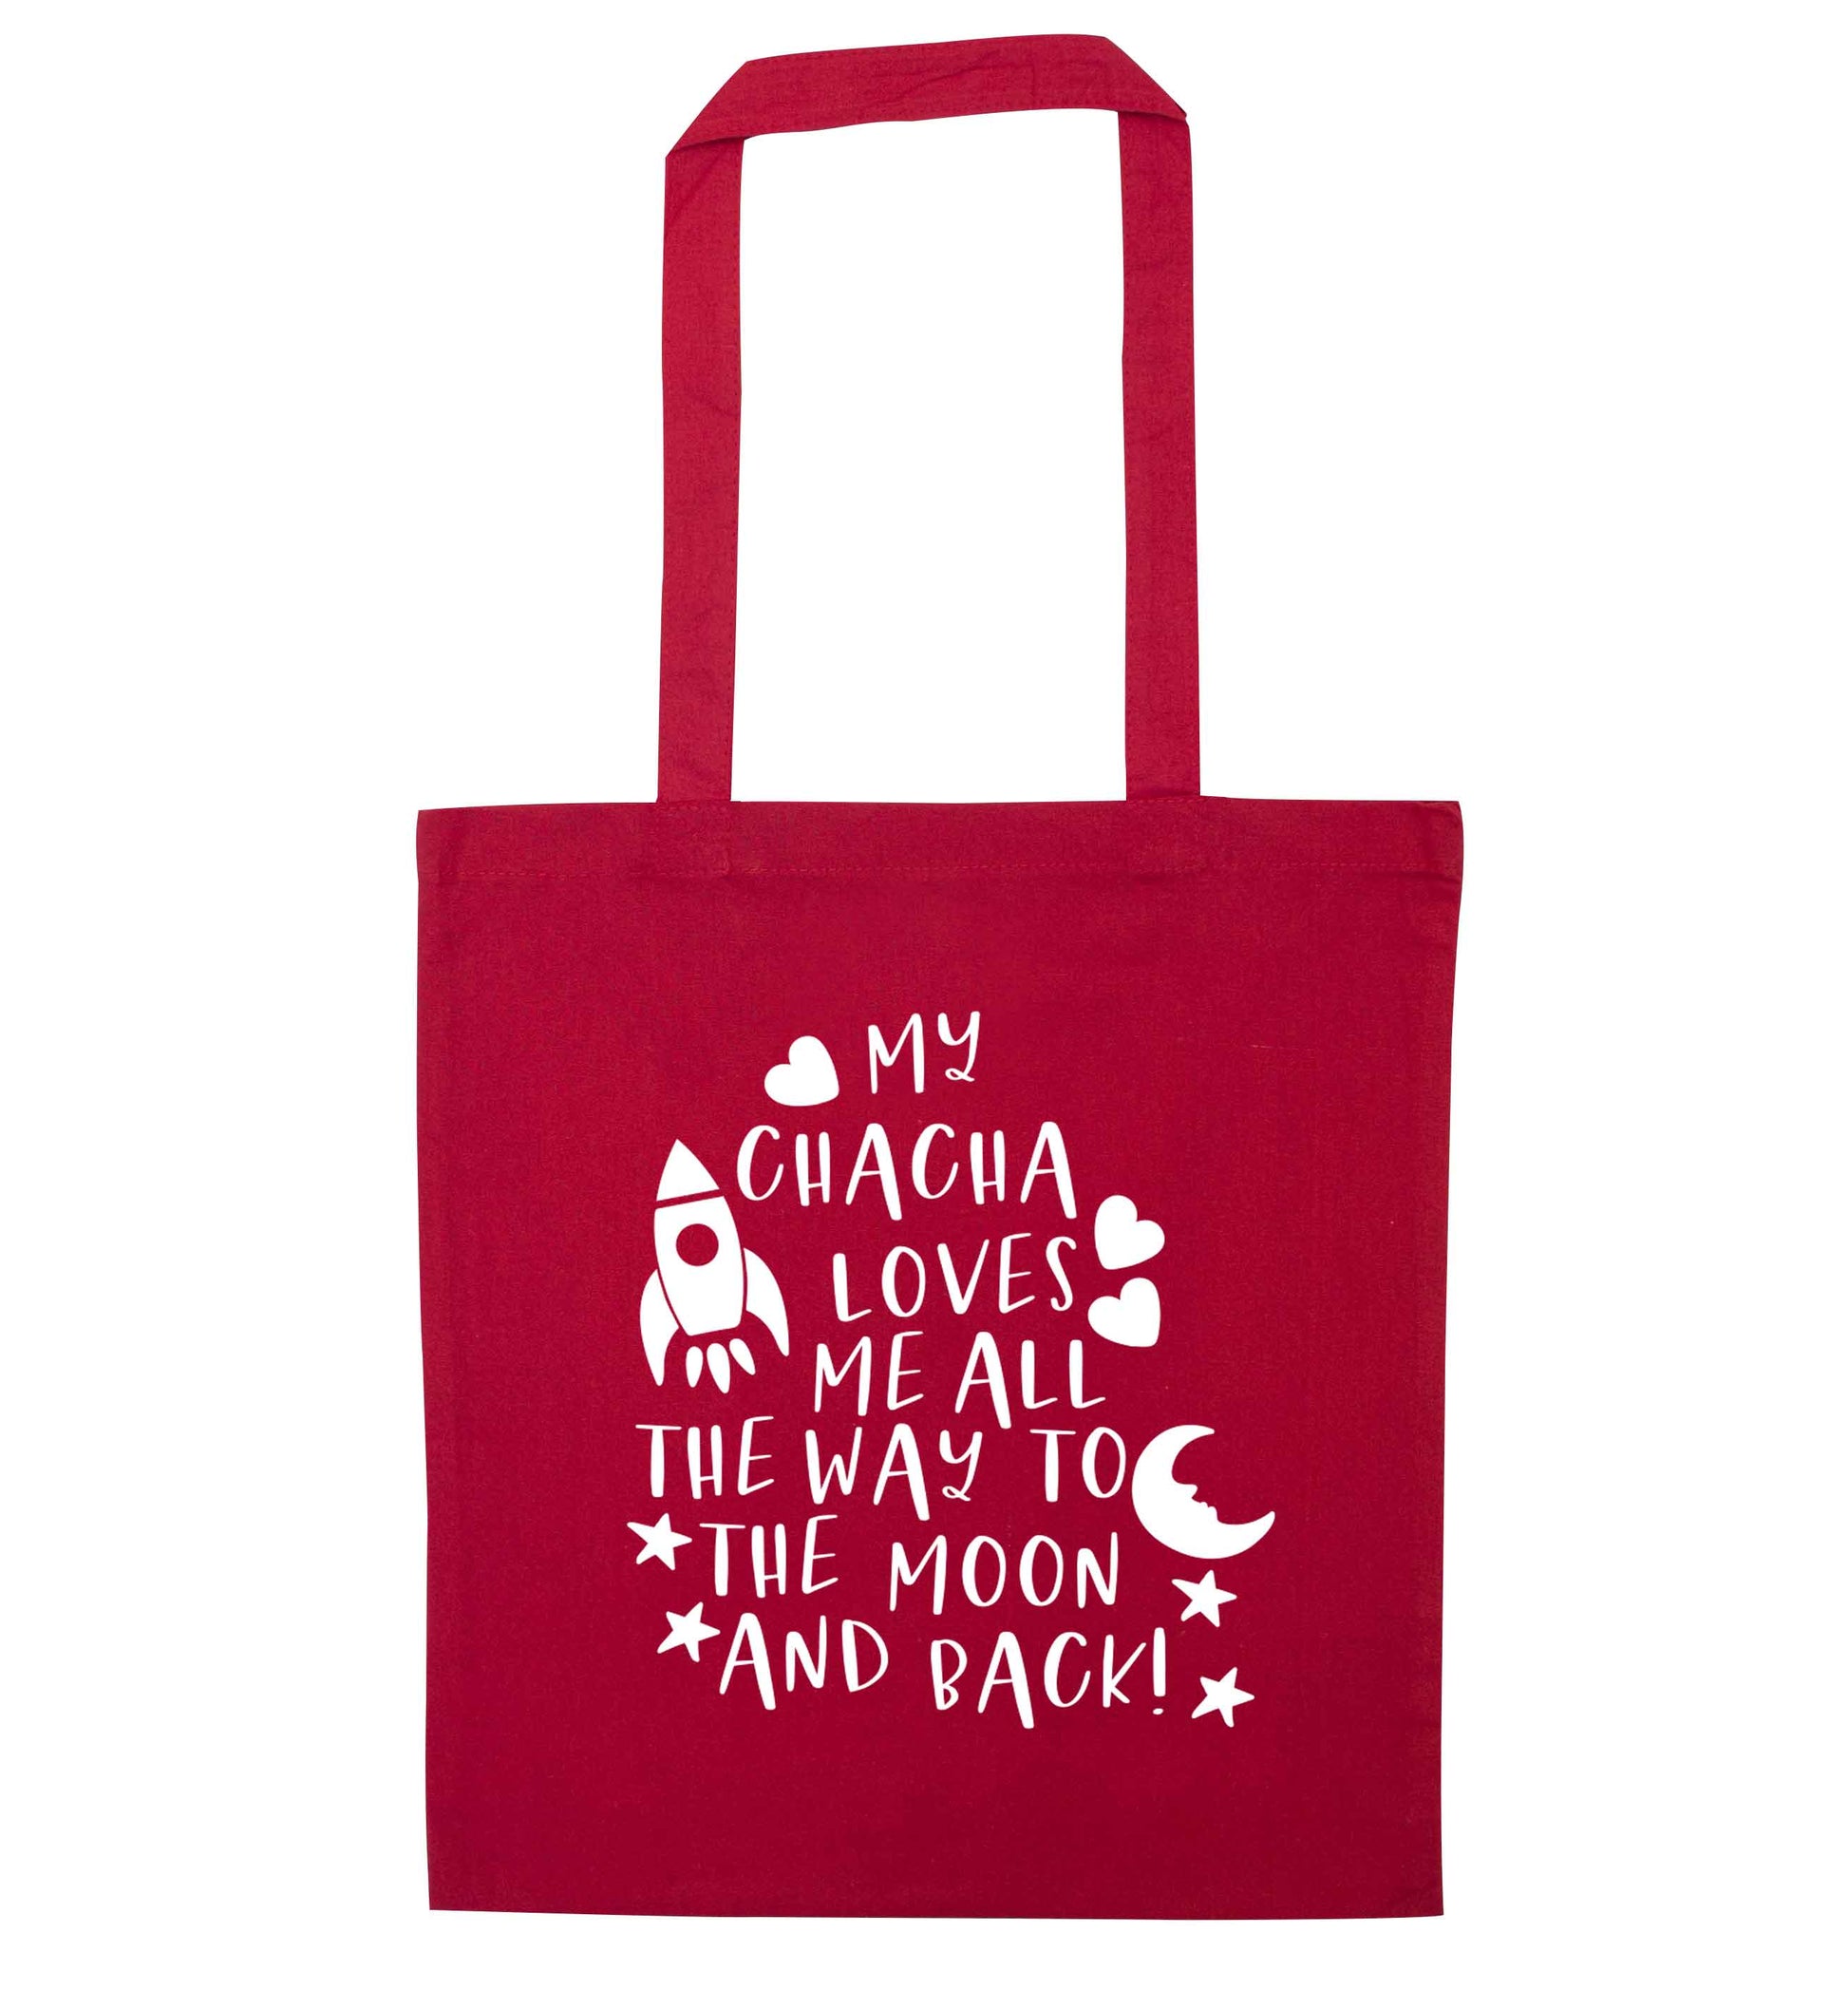 My chacha loves me all the way to the moon and back red tote bag